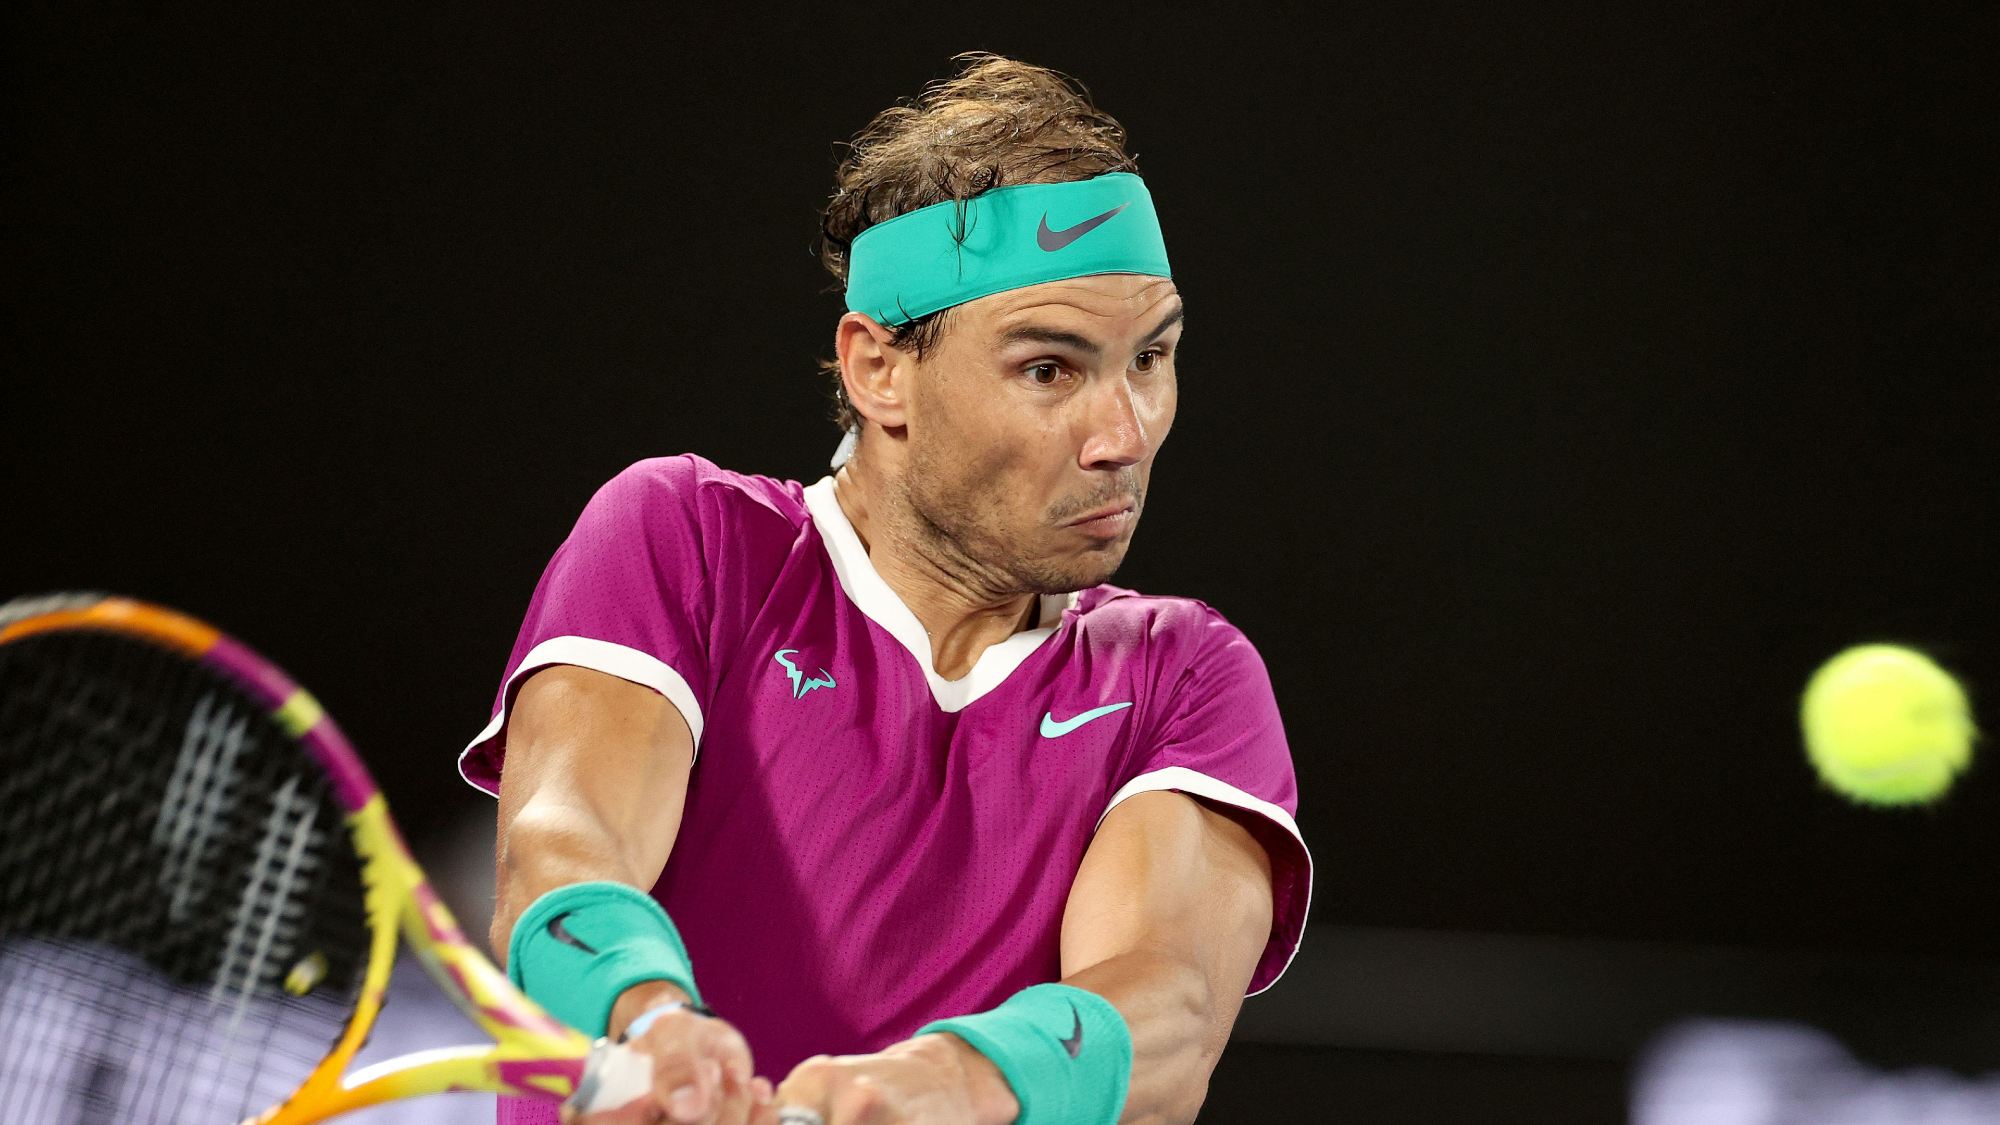 Spain's Rafael Nadal hits a return against Russia's Karen Khachanov during their men's singles match on day five of the Australian Open tennis tournament in Melbourne on January 21, 2022.